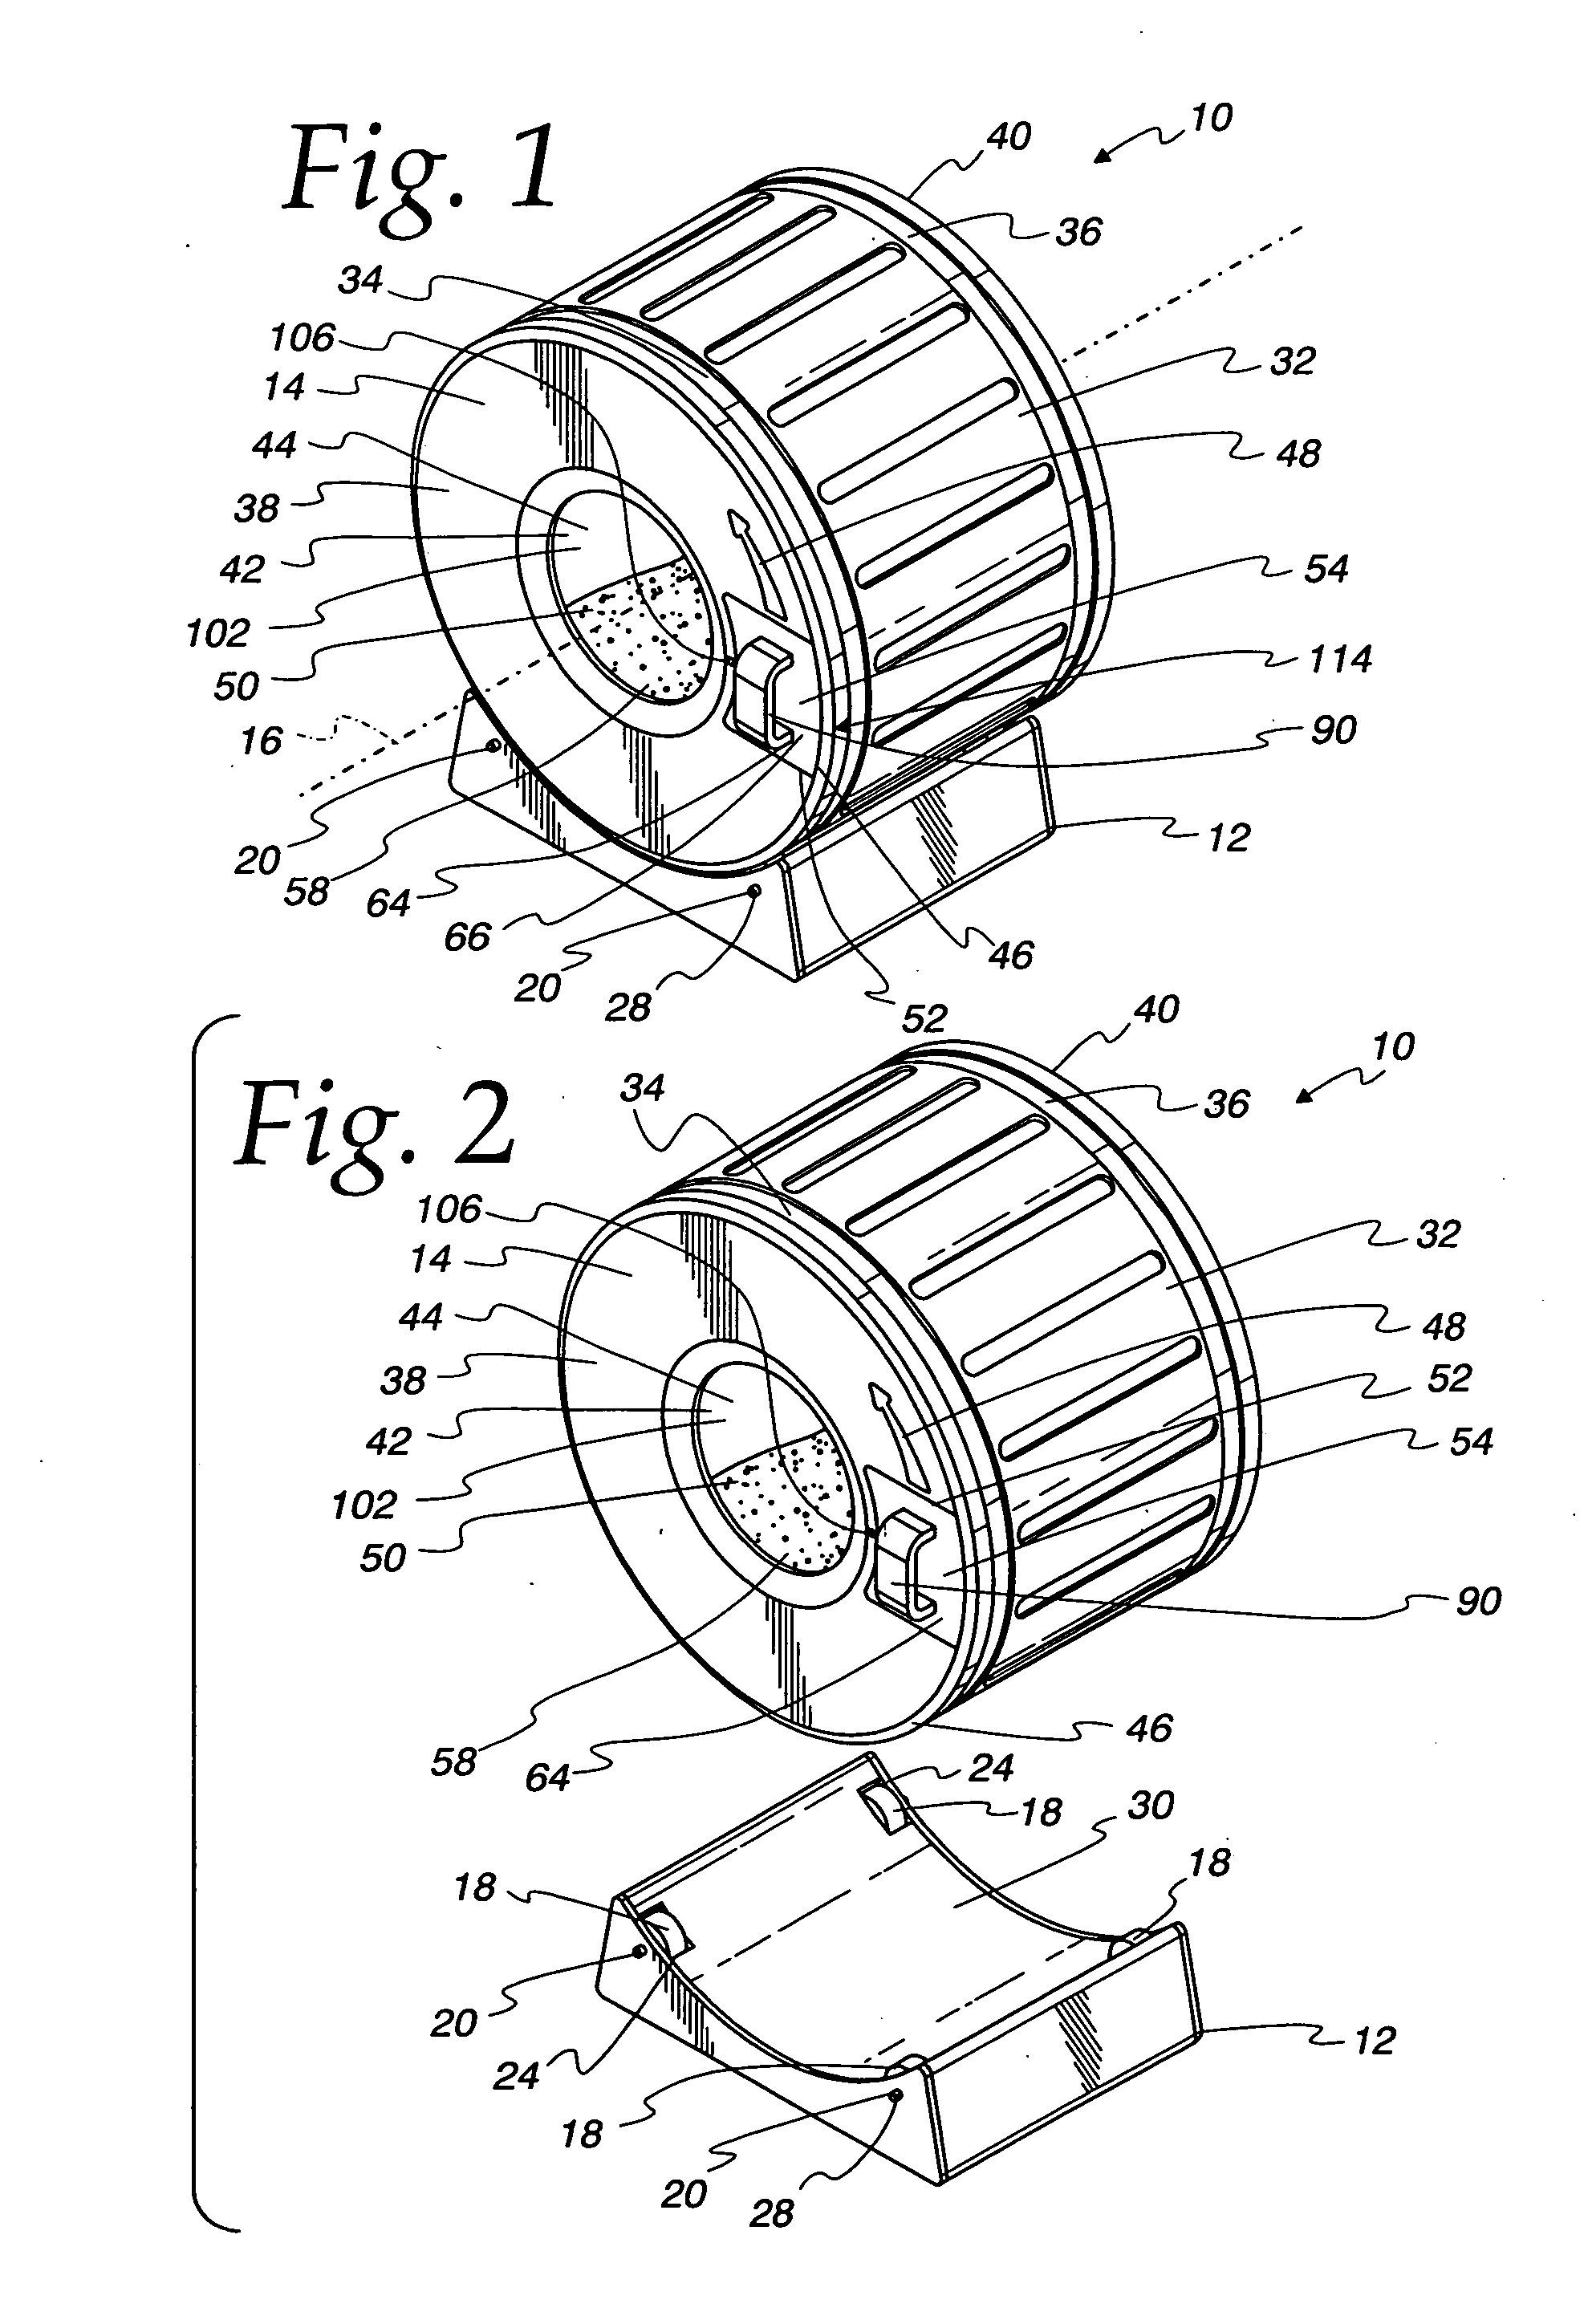 Apparatus and method for handling animal waste